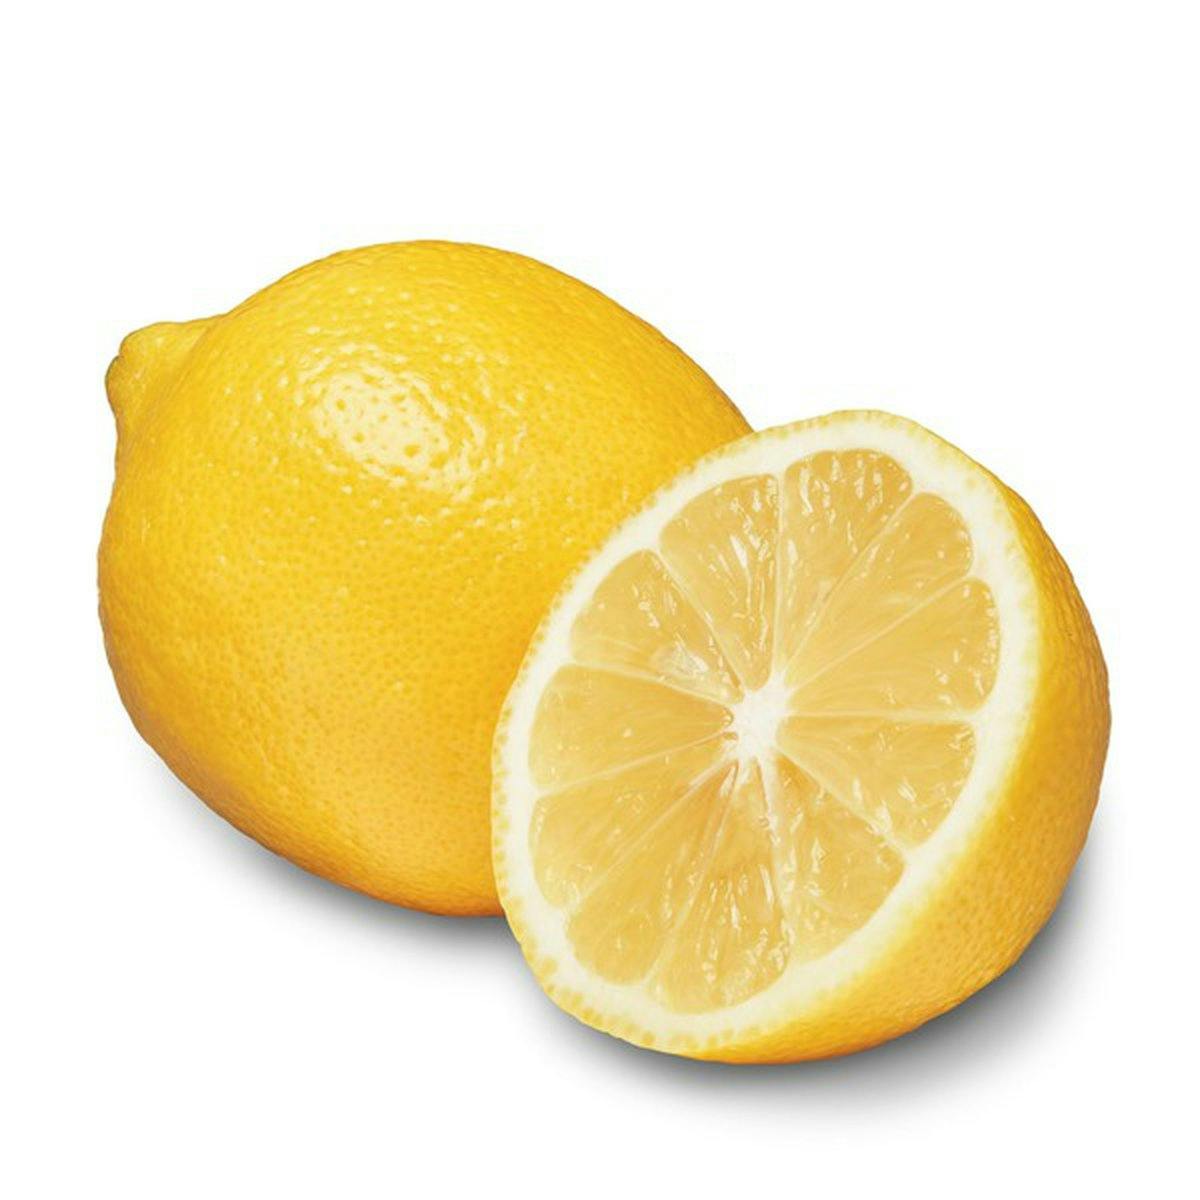 Finish with a squeeze of lemon